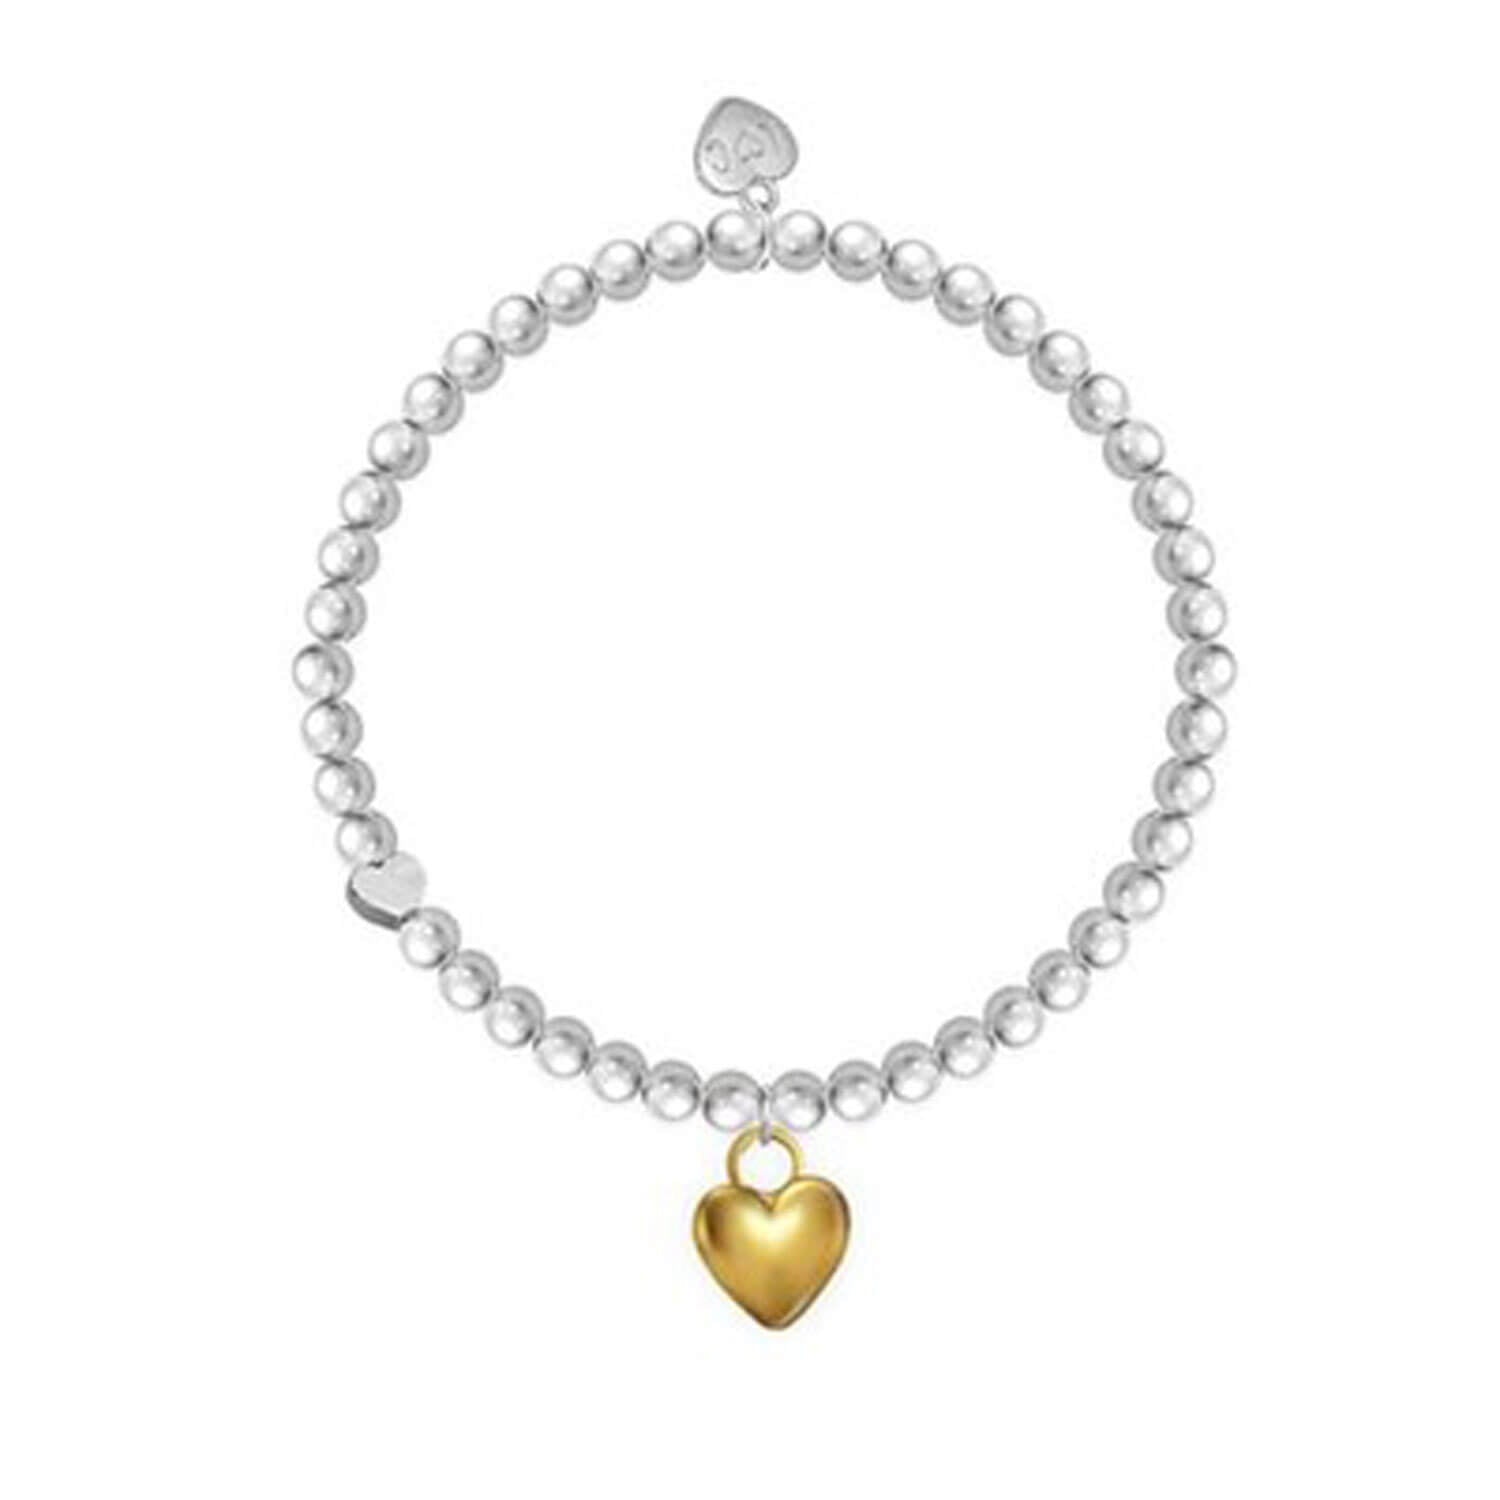 Life Charms Have A Heart Of Gold Bracelet - Silver 1 Shaws Department Stores